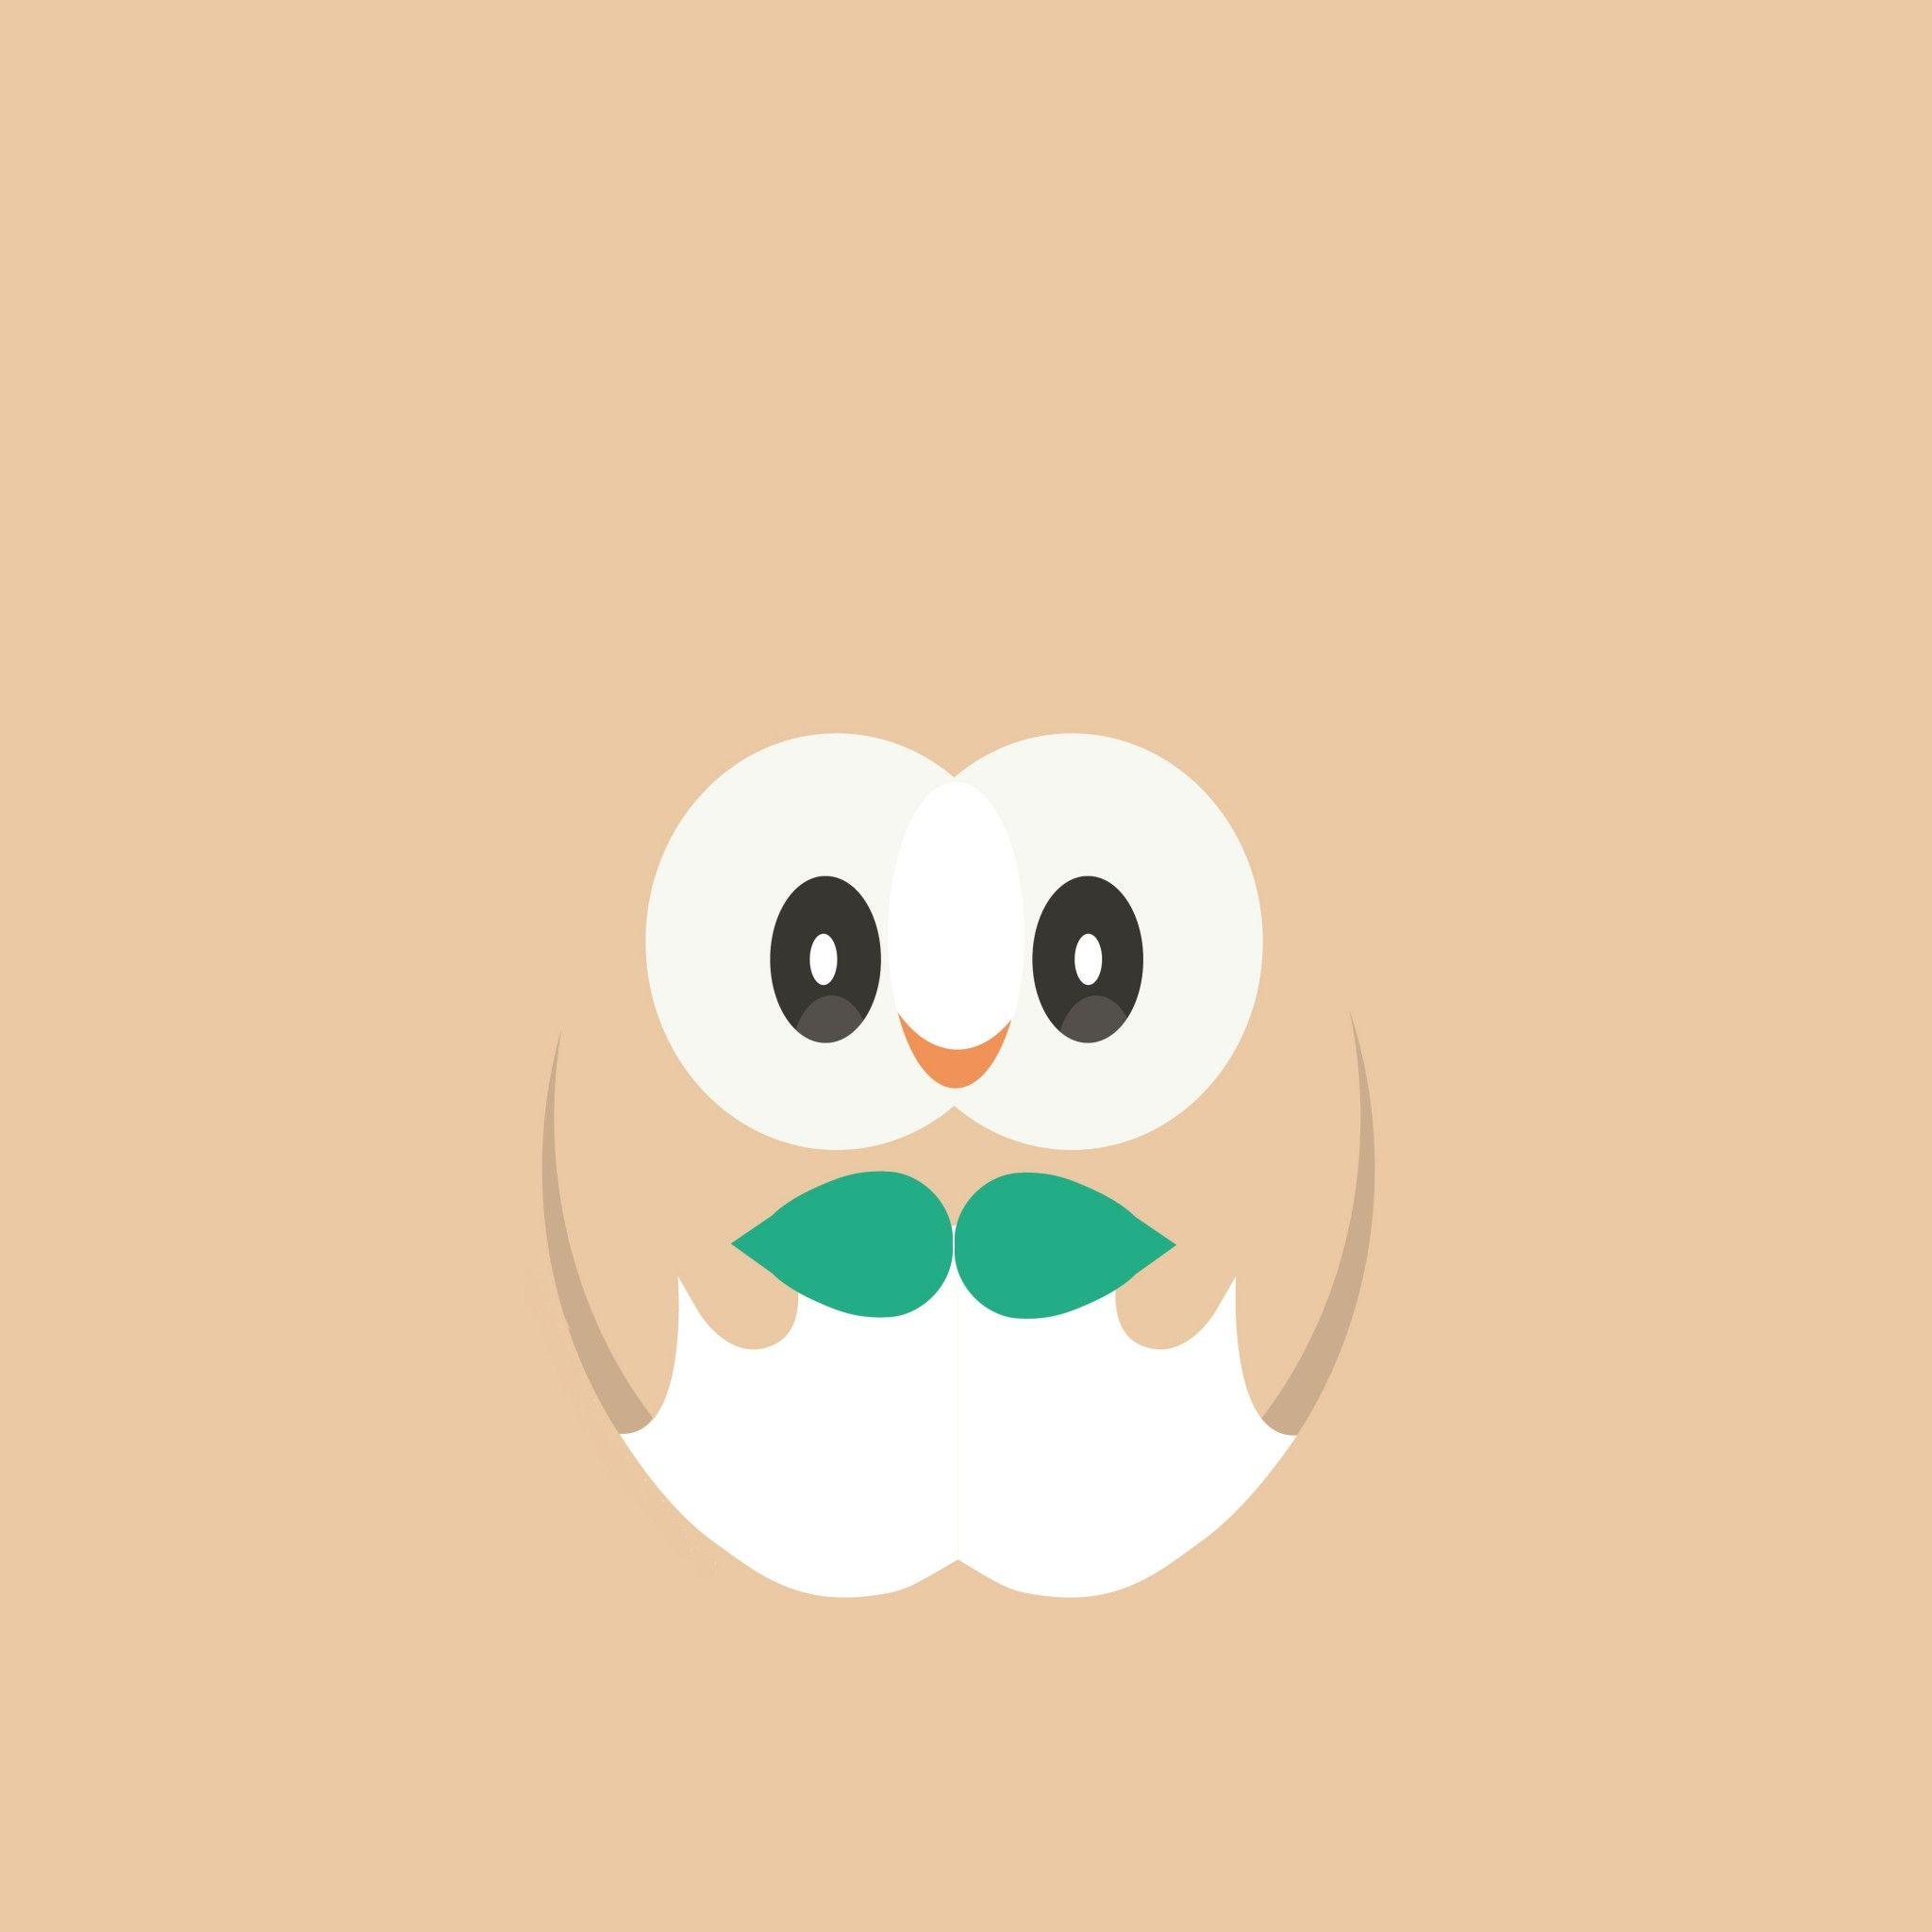 Rowlet Pokemon to see more of the cutest Pokemon art